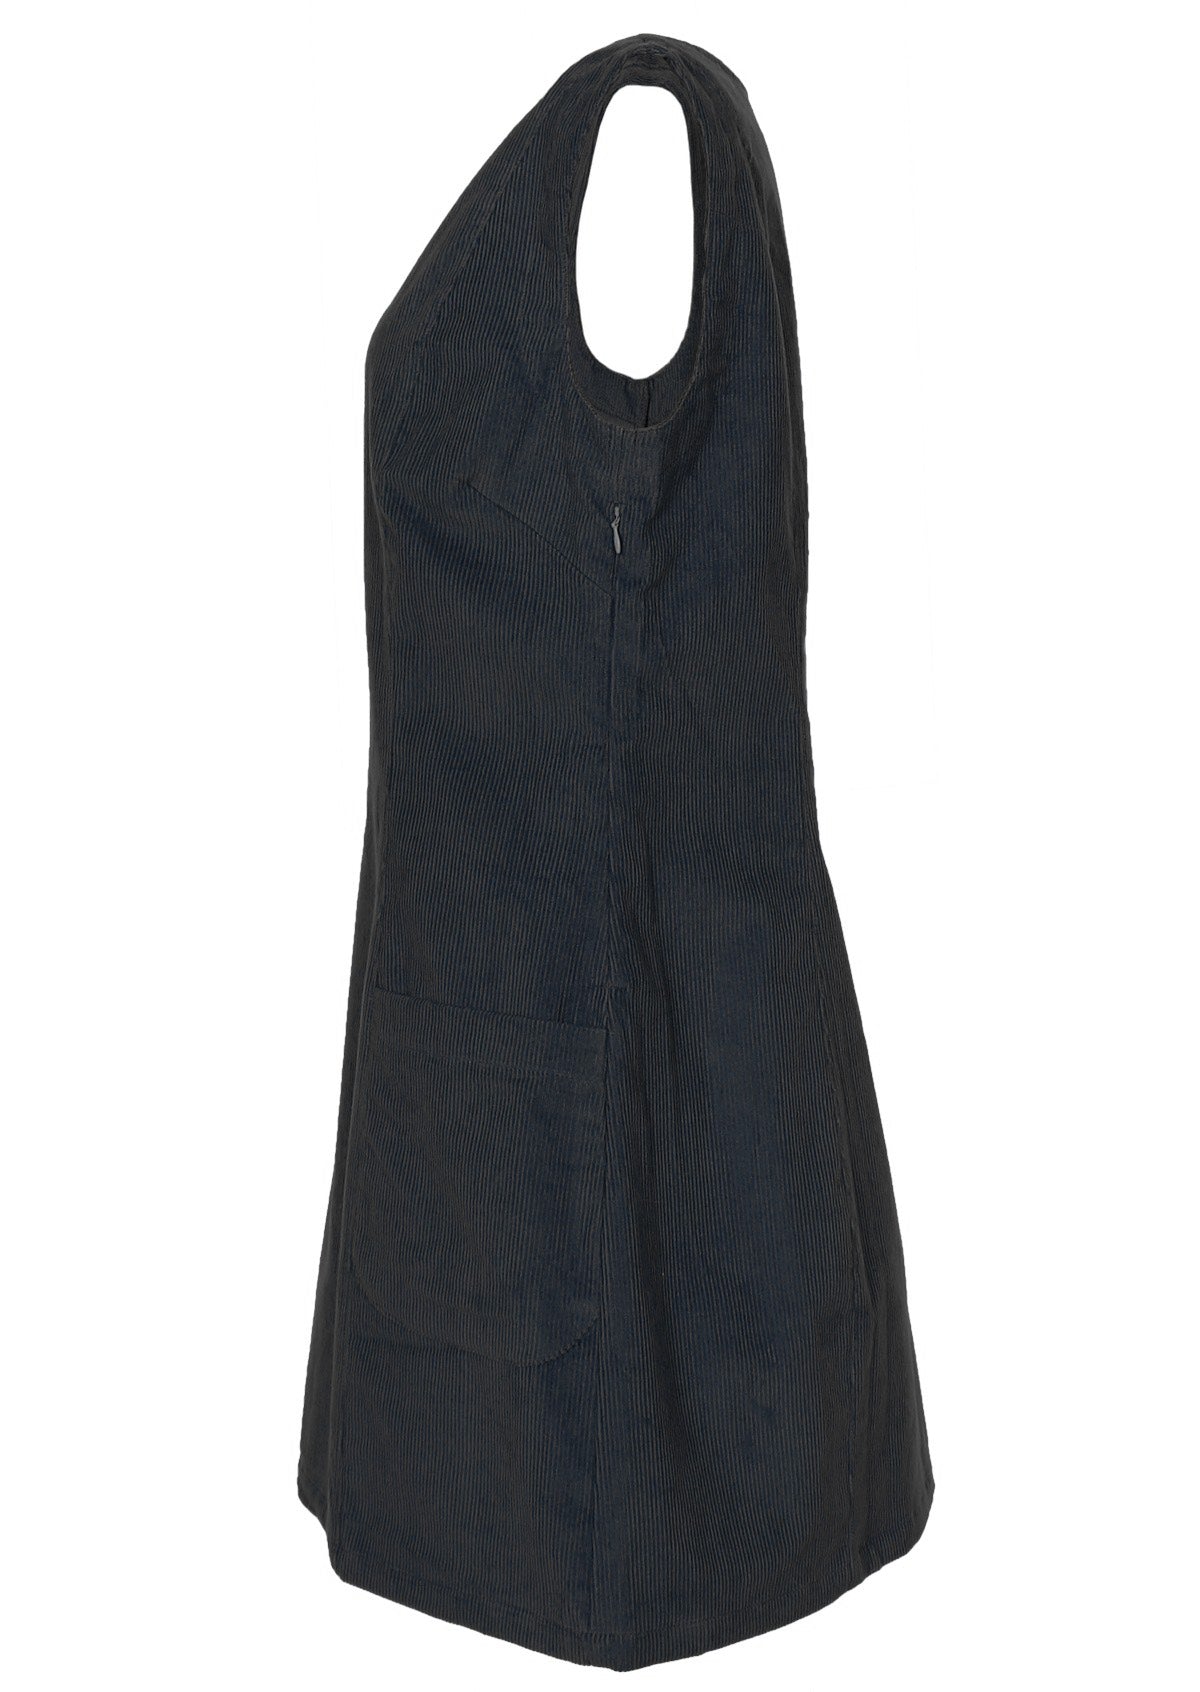 Sleeveless tunic is 100% cotton corduroy with an a-line skirt. 